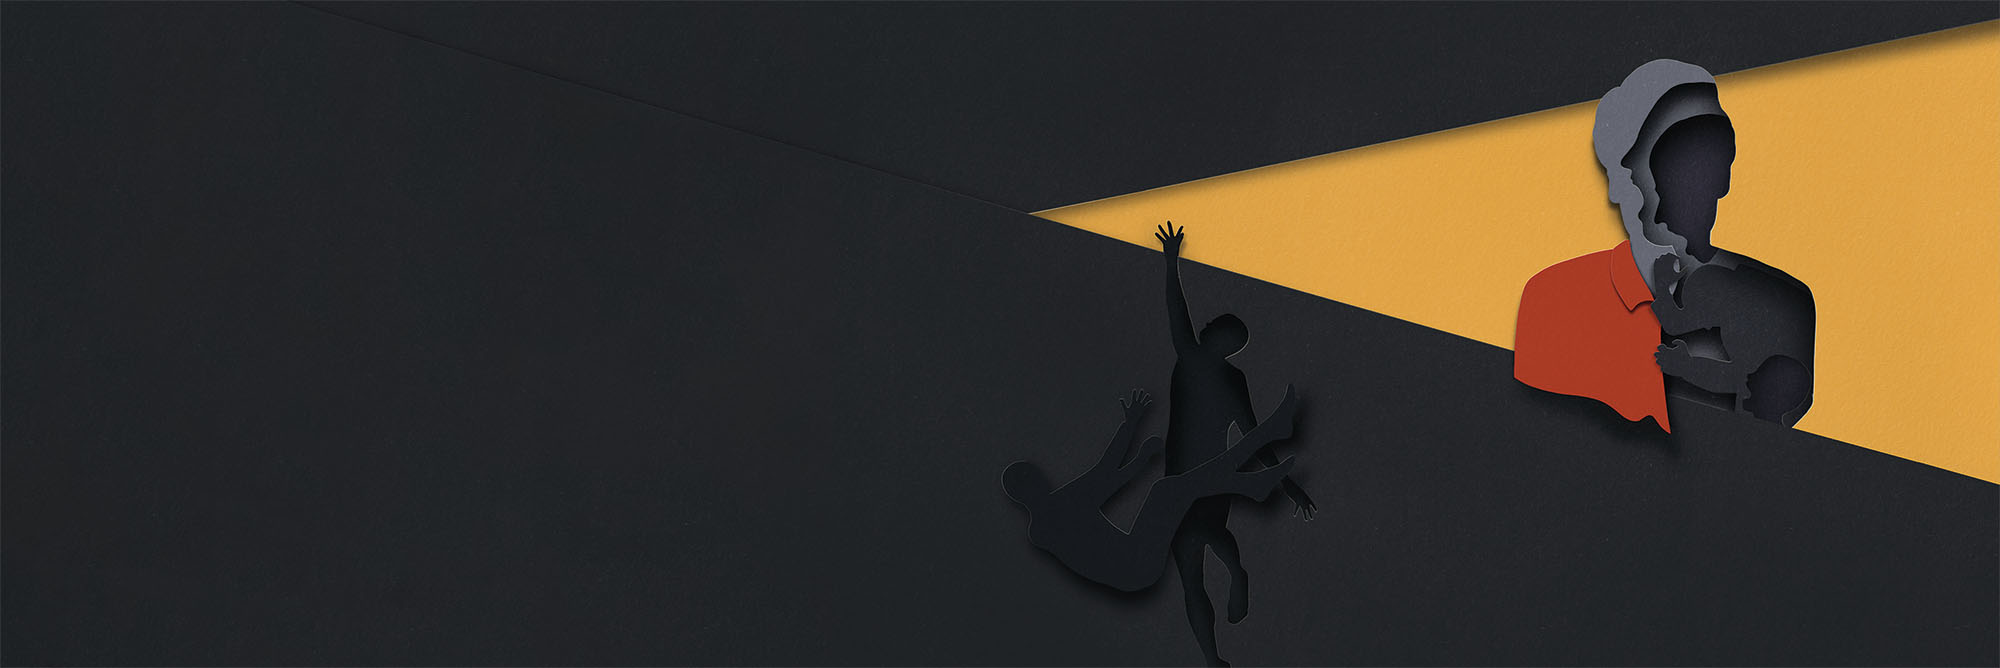 Layers of paper creating the silhouette of a person highlighted by a spotlight. A second figure cut out of paper is reaching up towards the person in the spotlight.